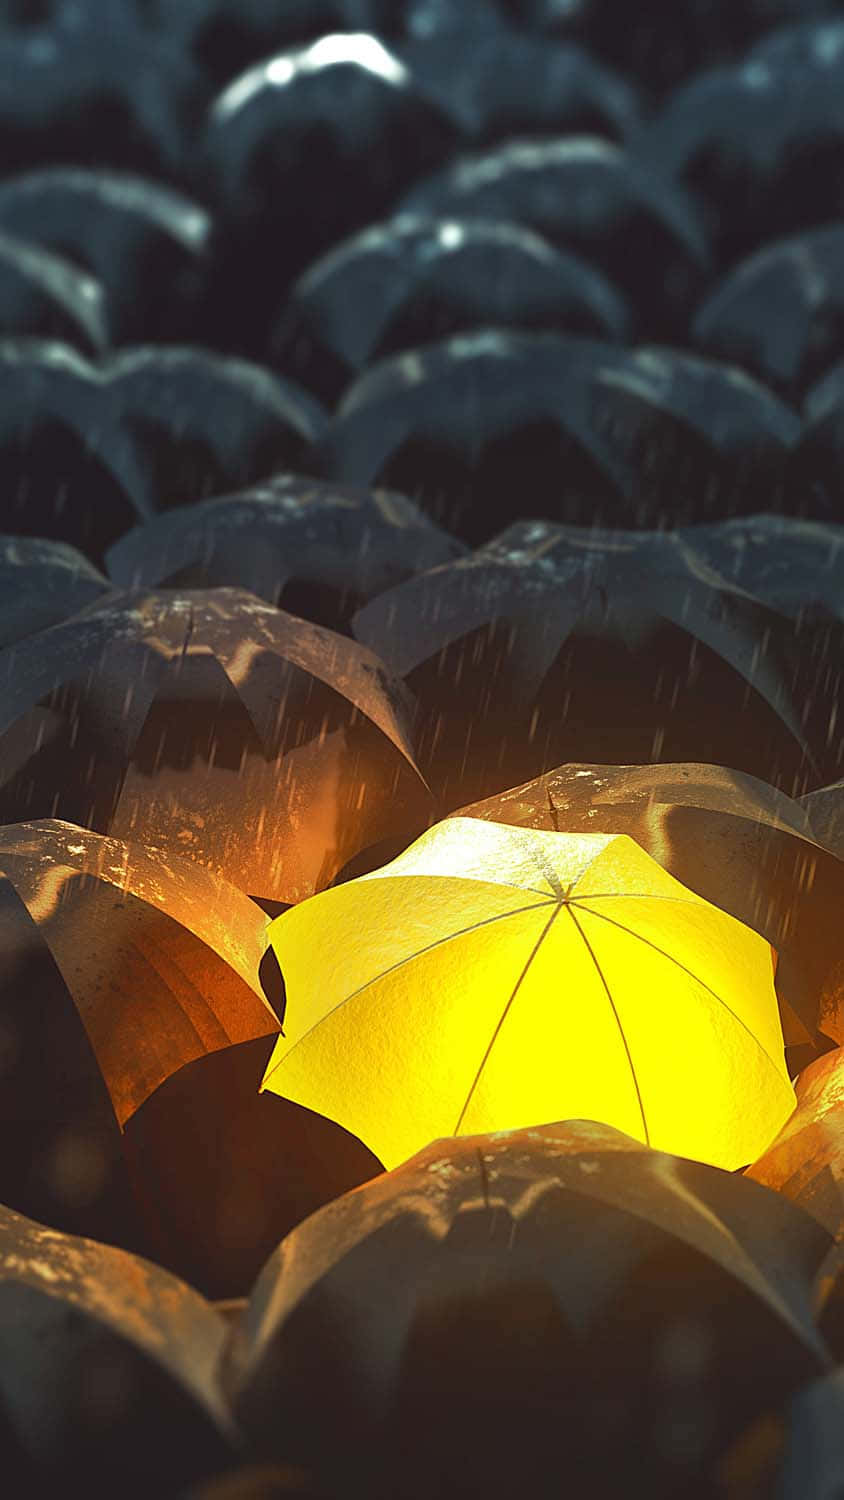 Yellow Umbrella In The Middle Of A Group Of Umbrellas Wallpaper